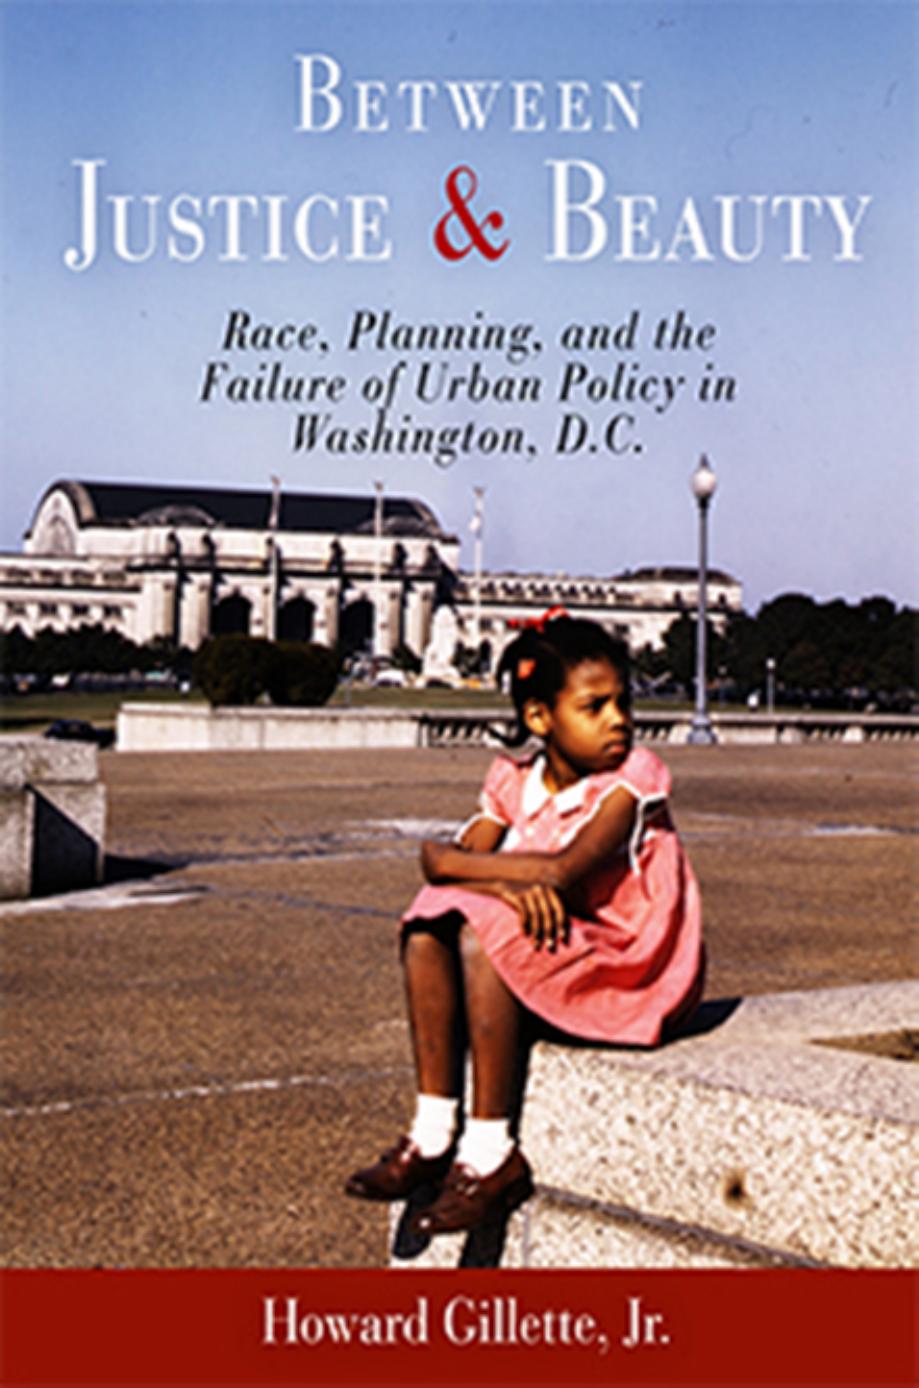 Between Justice and Beauty: Race, Planning, and the Failure of Urban Policy in Washington, D.C. by Howard Gillette Jr